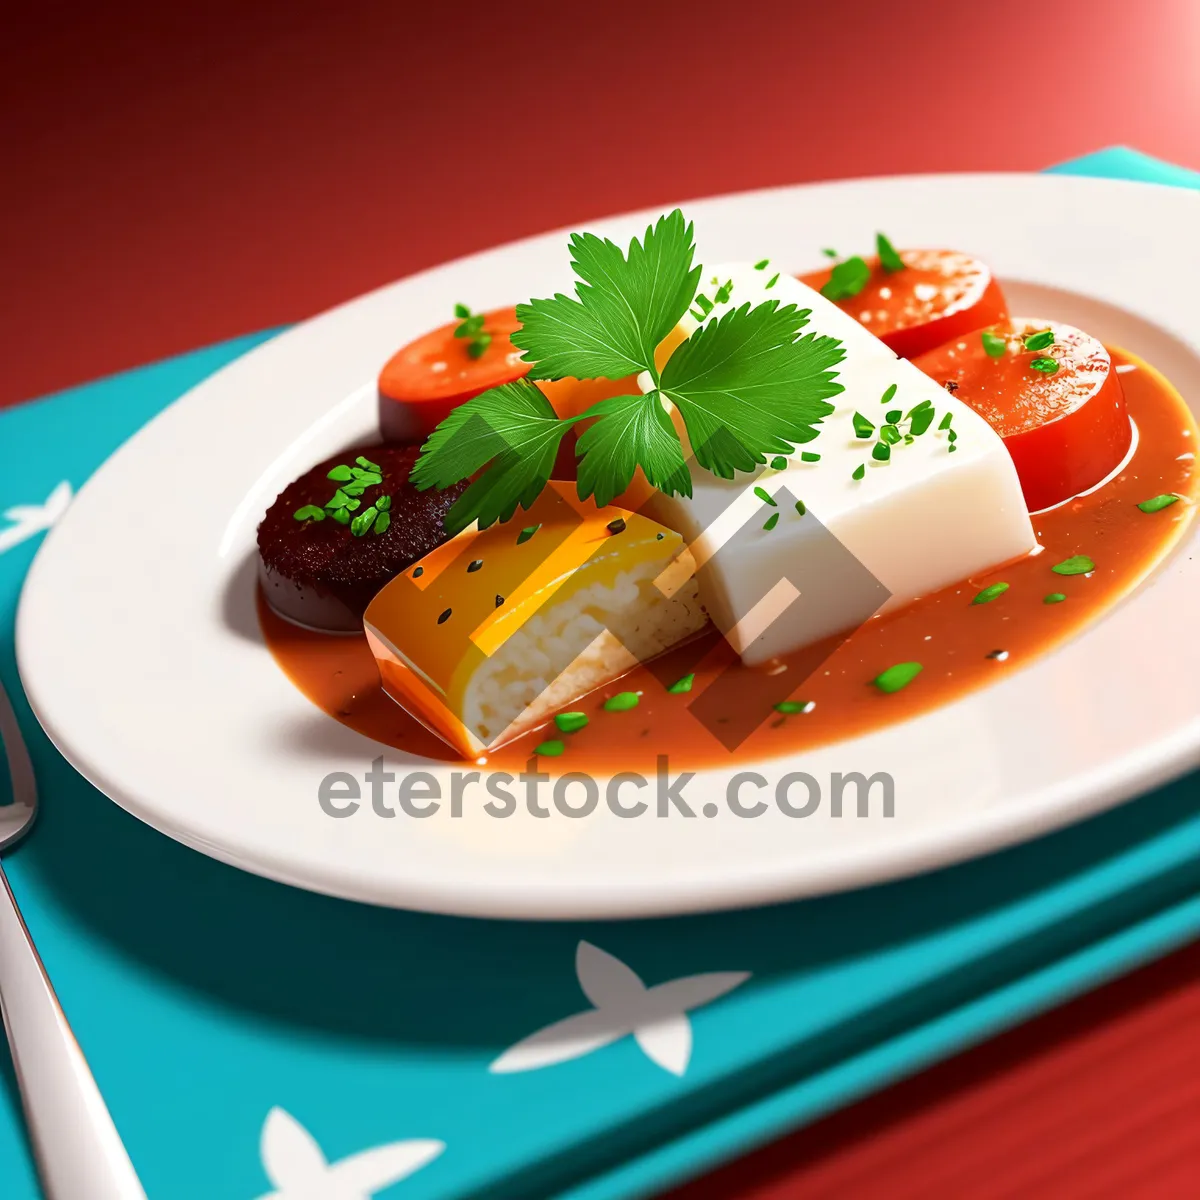 Picture of Delicious Tomato and Salmon Gourmet Plate